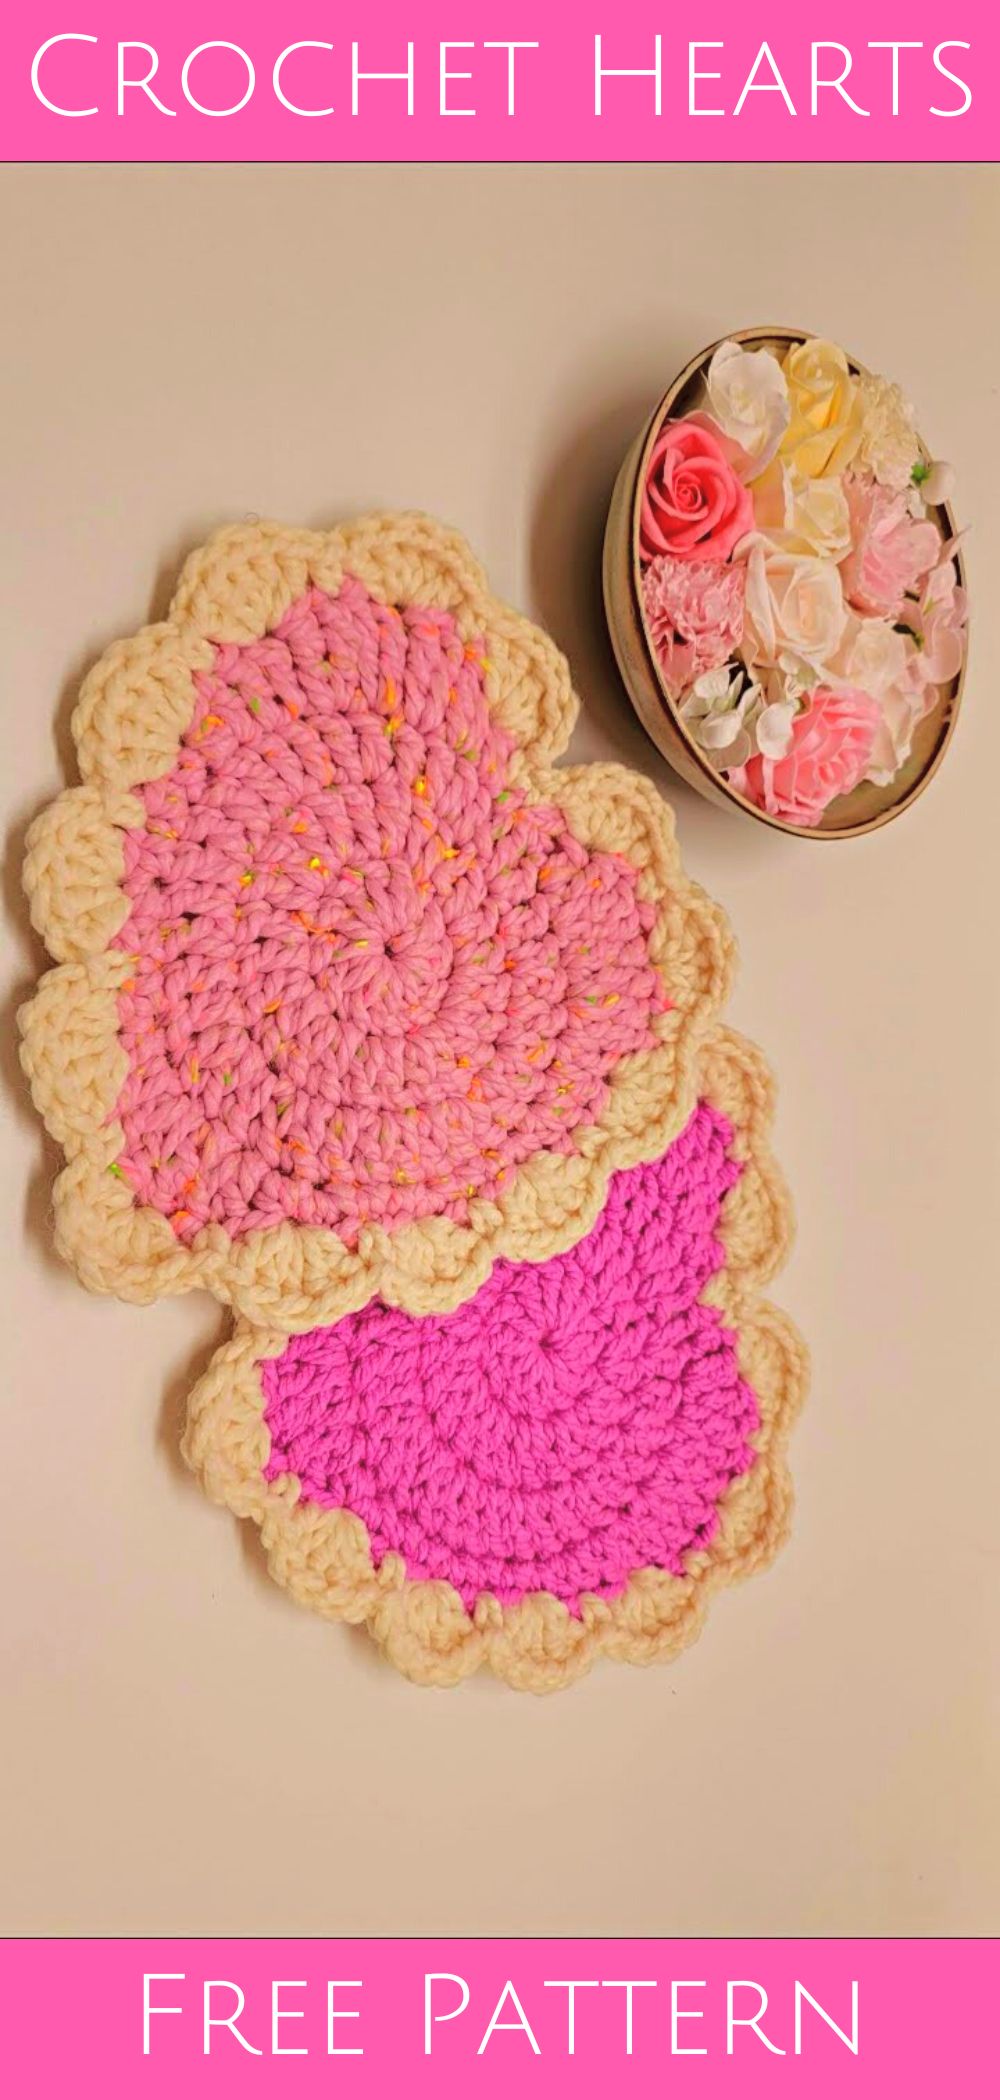 Crochet Valentines Day Heart Pattern is easy to make a wonderful gift for loved ones! It's time to start crocheting!